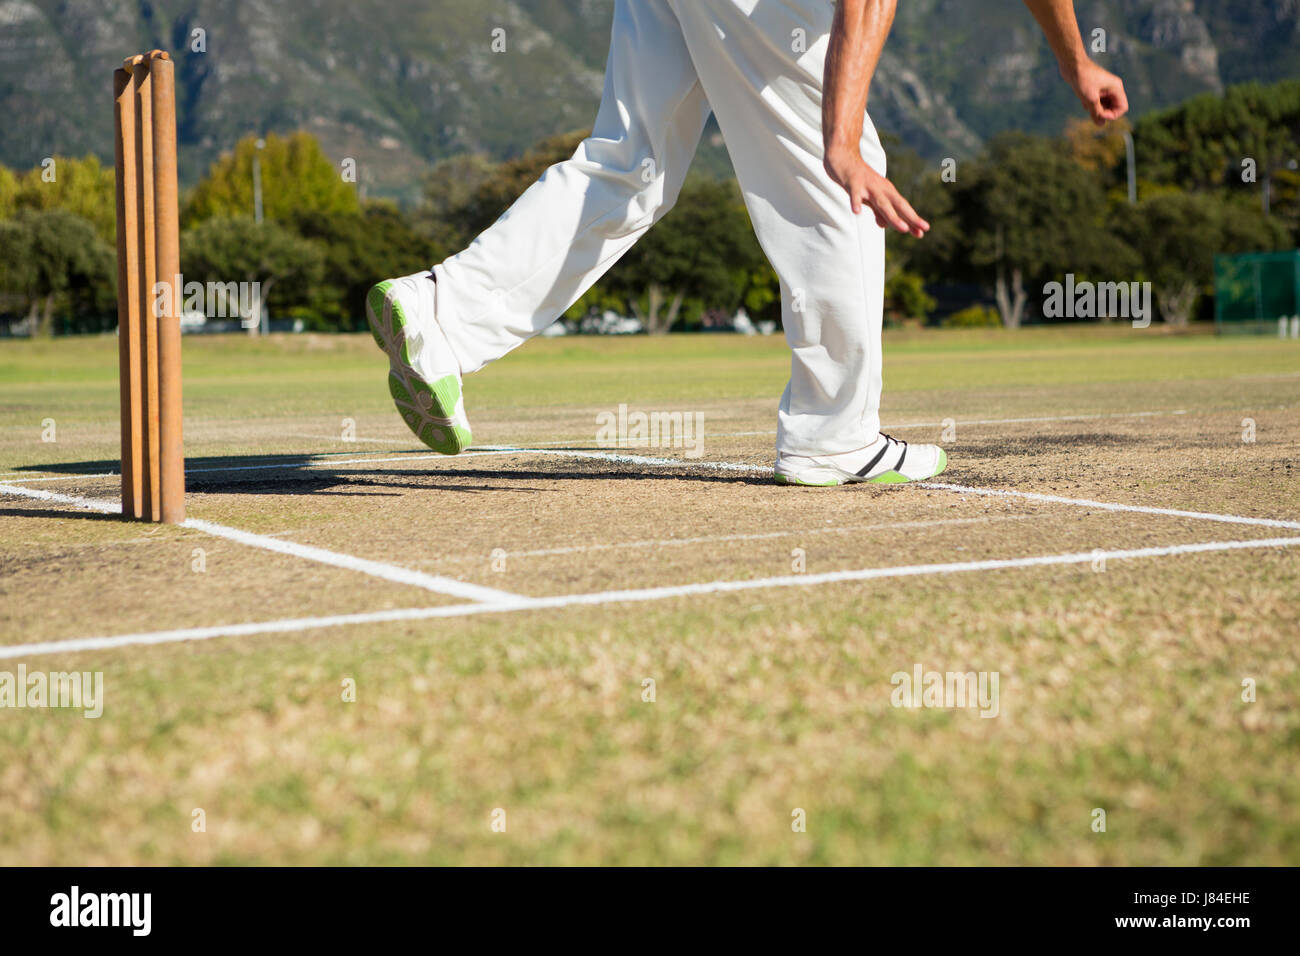 Low section of player standing by stumps at cricket field on sunny day Stock Photo